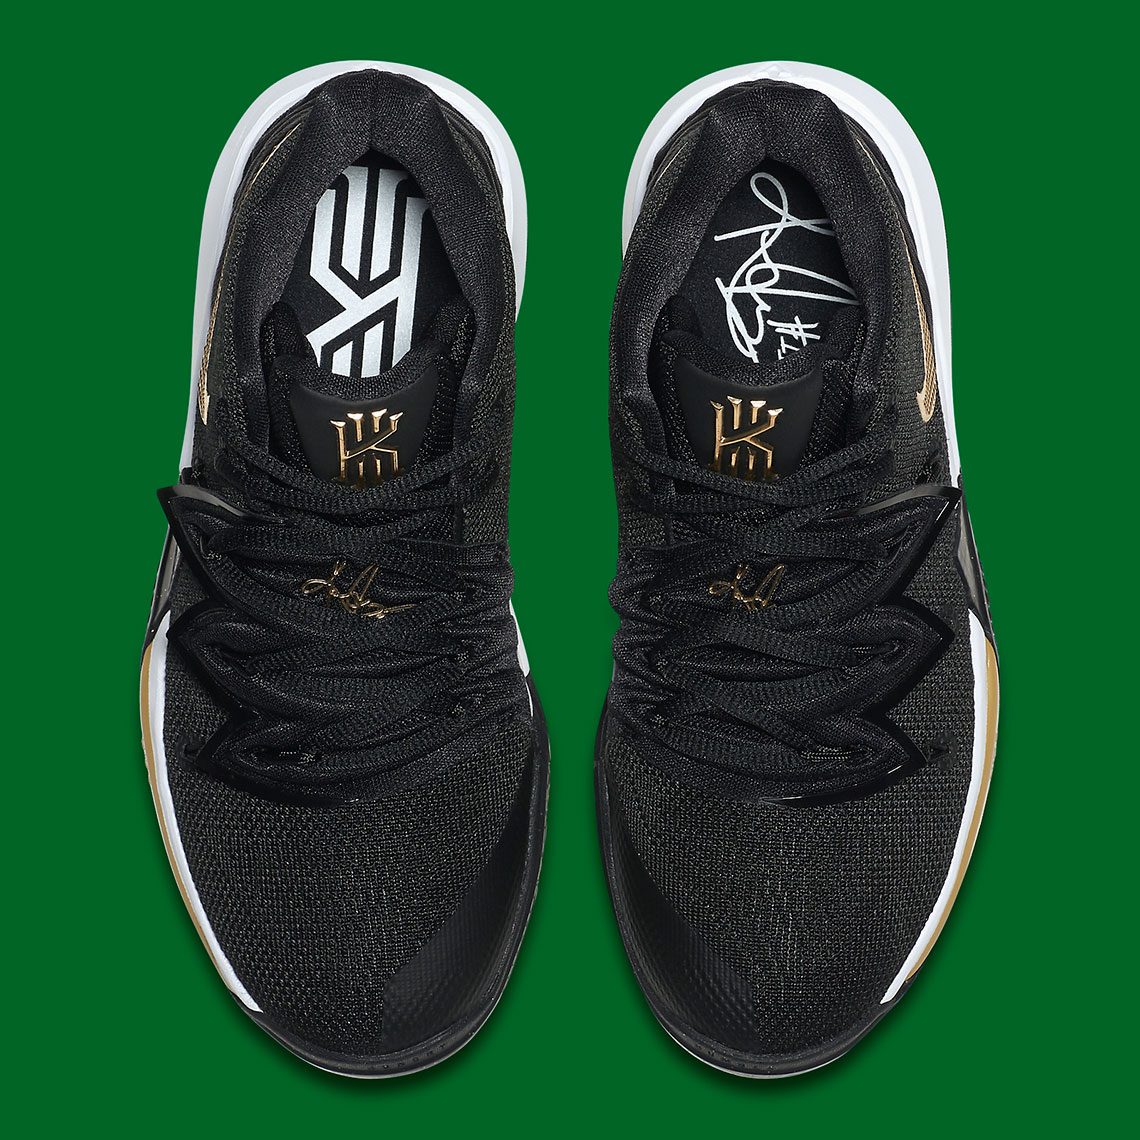 kyrie 5 gold and black Online